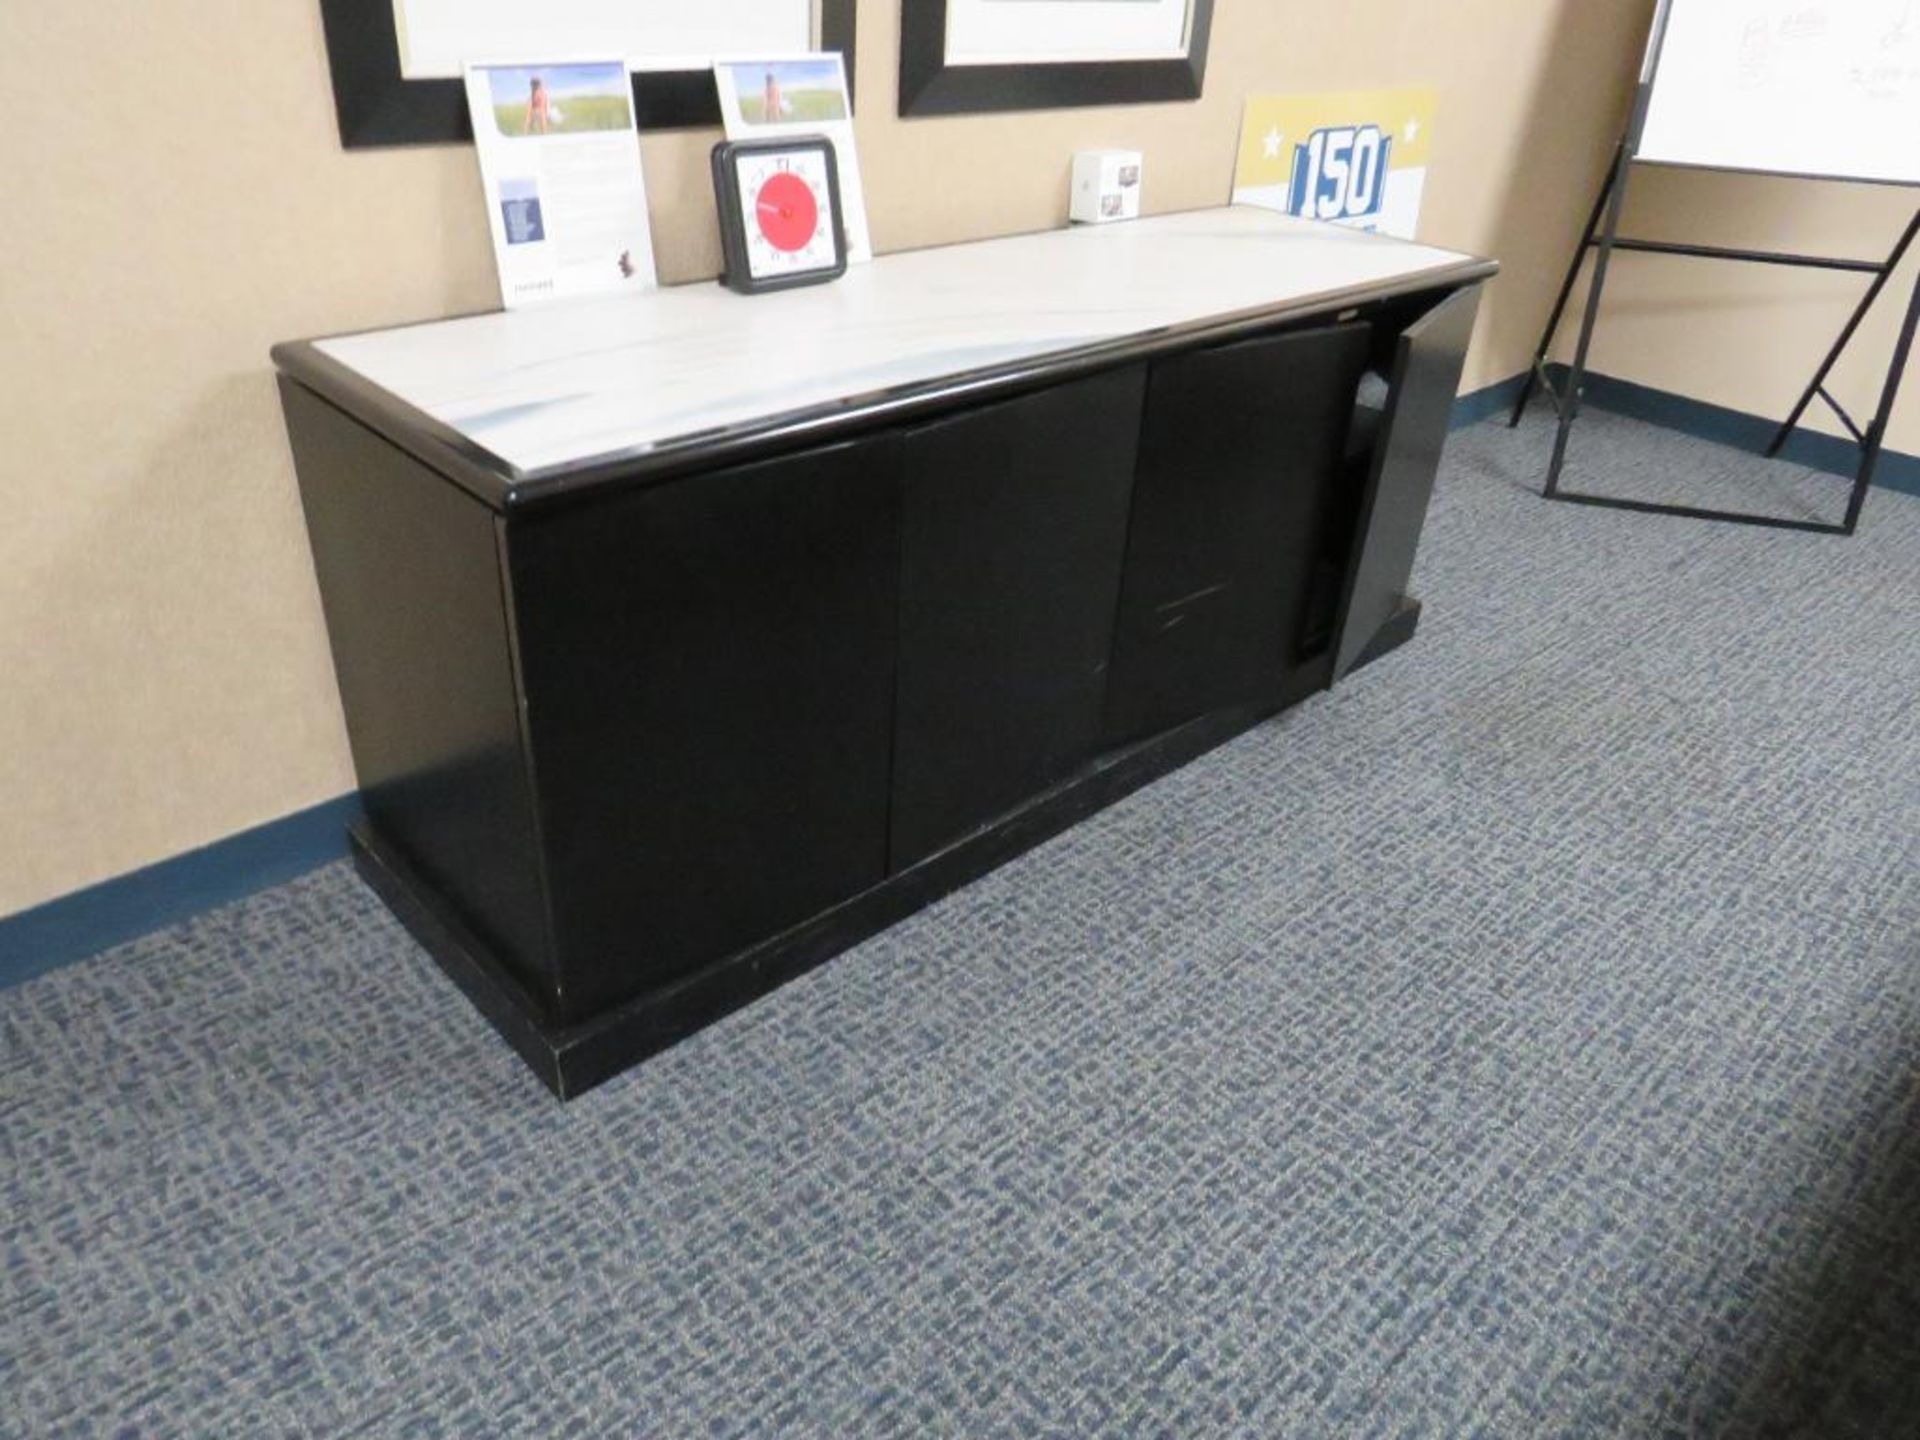 Lot c/o: (1) Rolling Chair, (1) 144x48 1-Pc Conference Table, (1) 72x22 4-Door Credenza, Wall Art & - Image 3 of 6